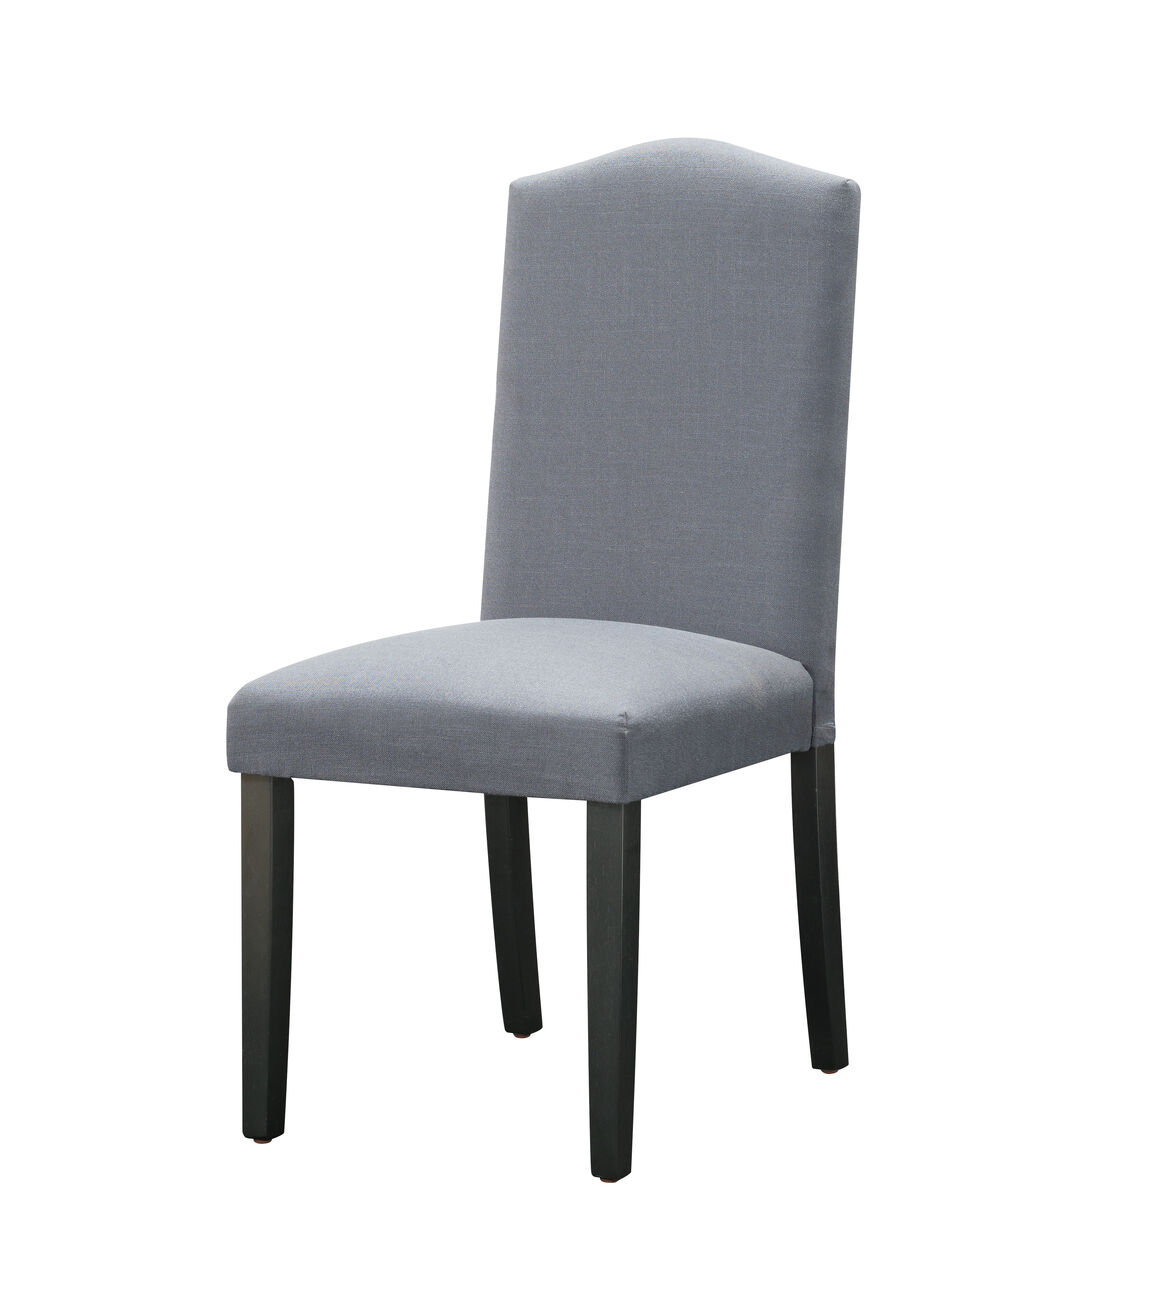 Fabric Upholstered Wooden Dining Chair with Scalloped Back, Set of 2, Gray